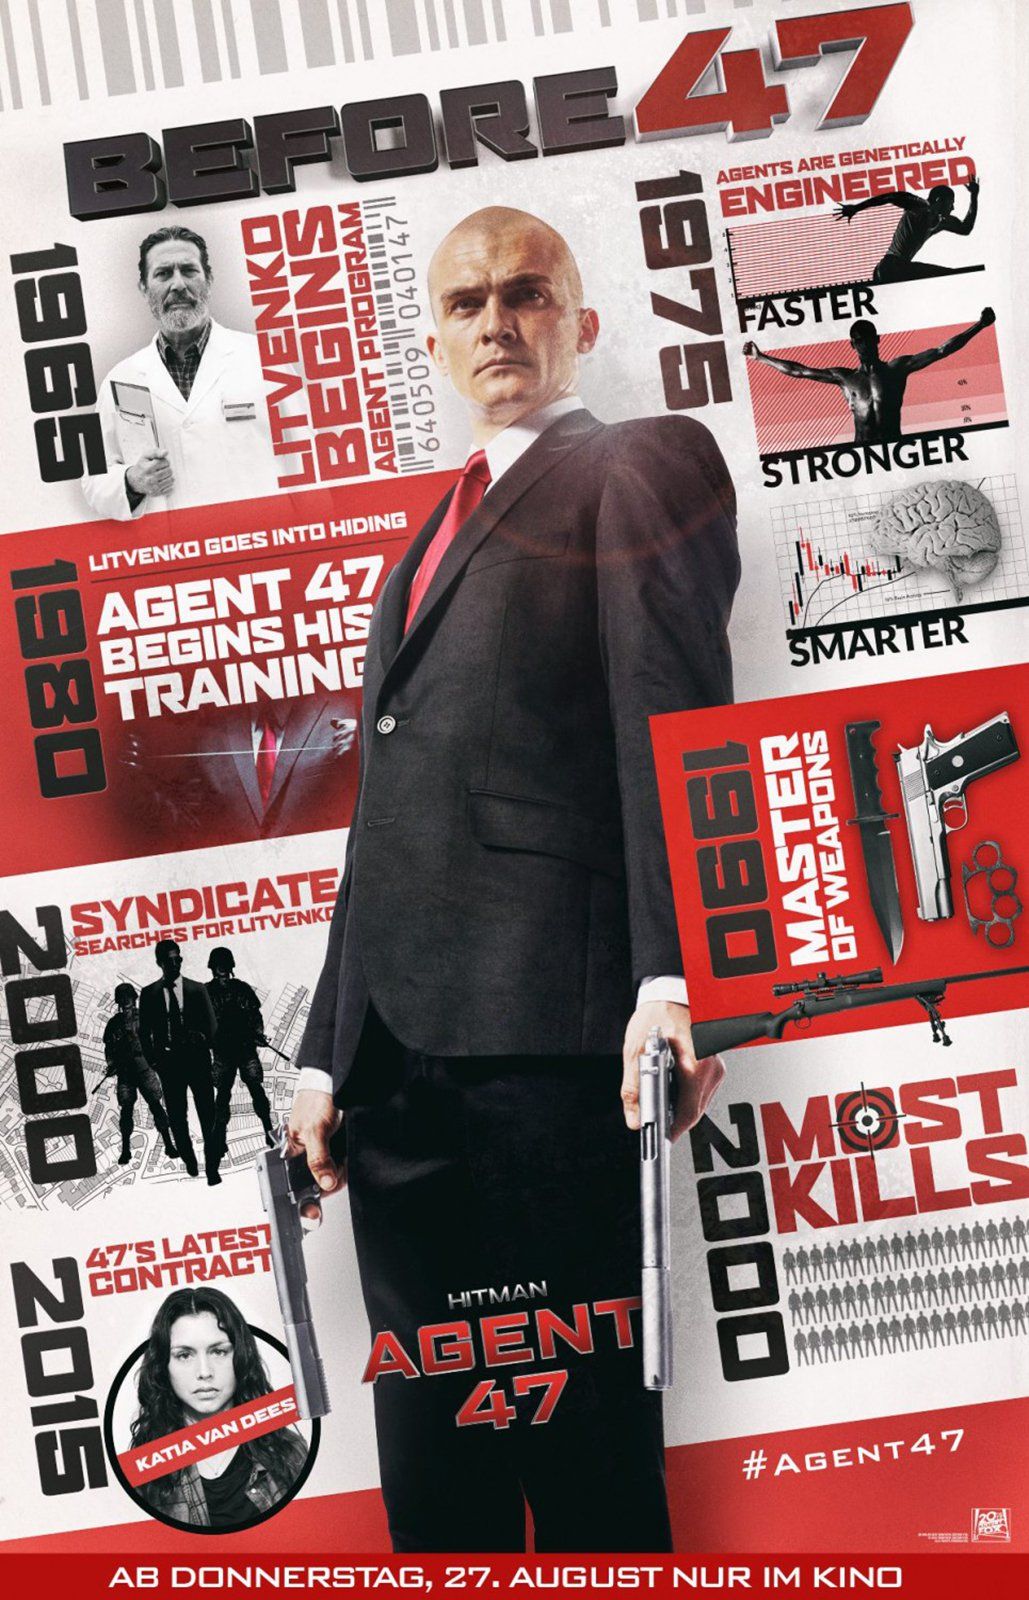 Further poster for 'Hitman: Agent 47' featuring stunts and precision driving by Ferdi Fischer.